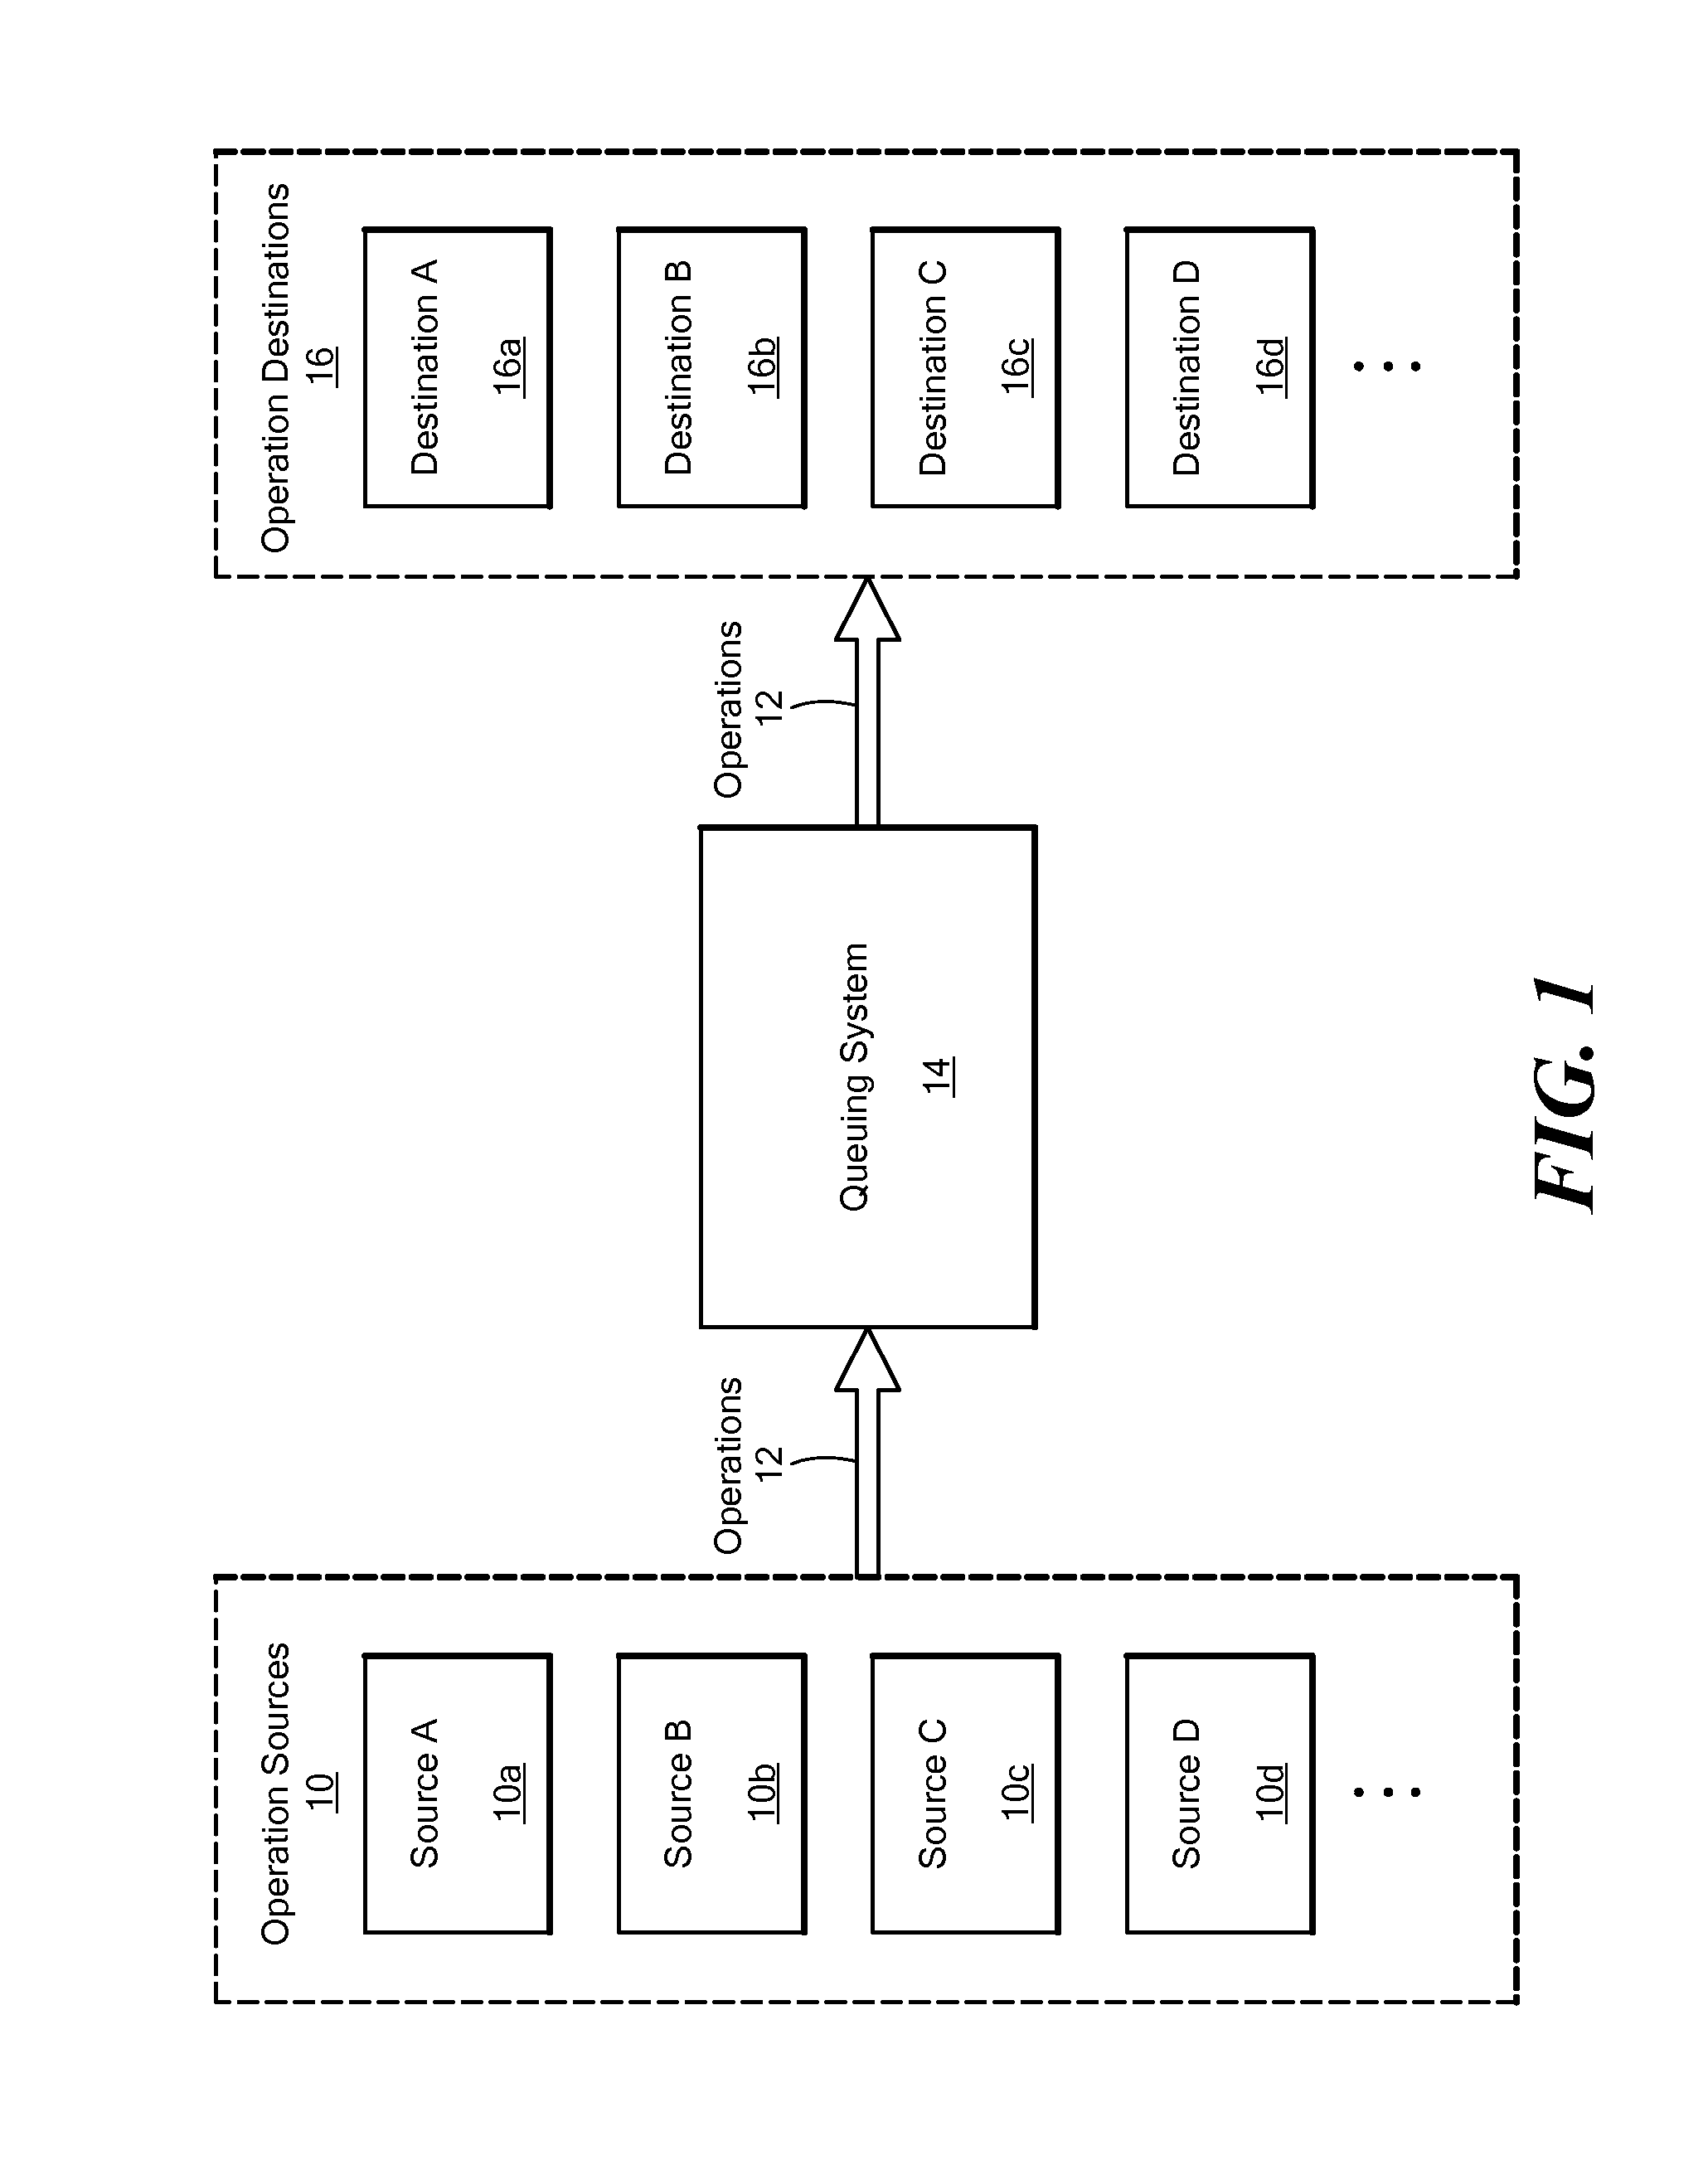 Method and system for dynamic queue splitting for maximizing throughput of queue based operations while maintaining per-destination order of operations